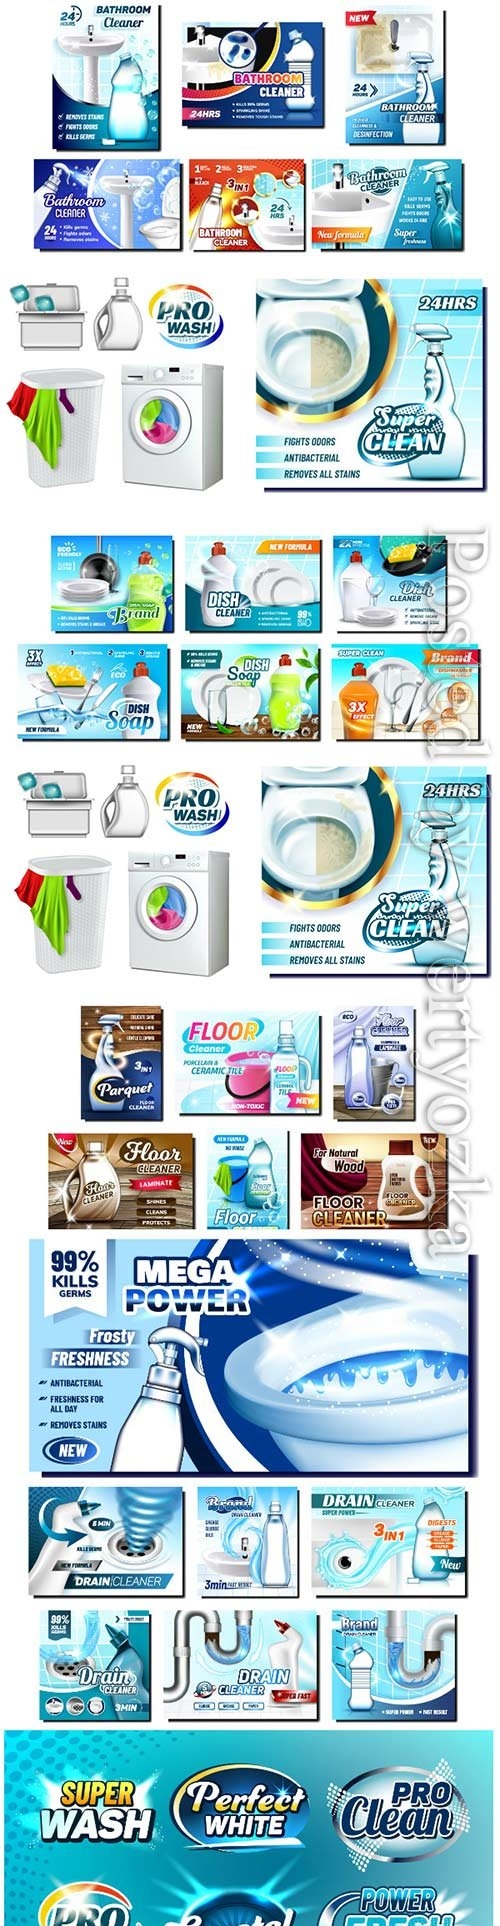 Cleaner creative promo banners vector set